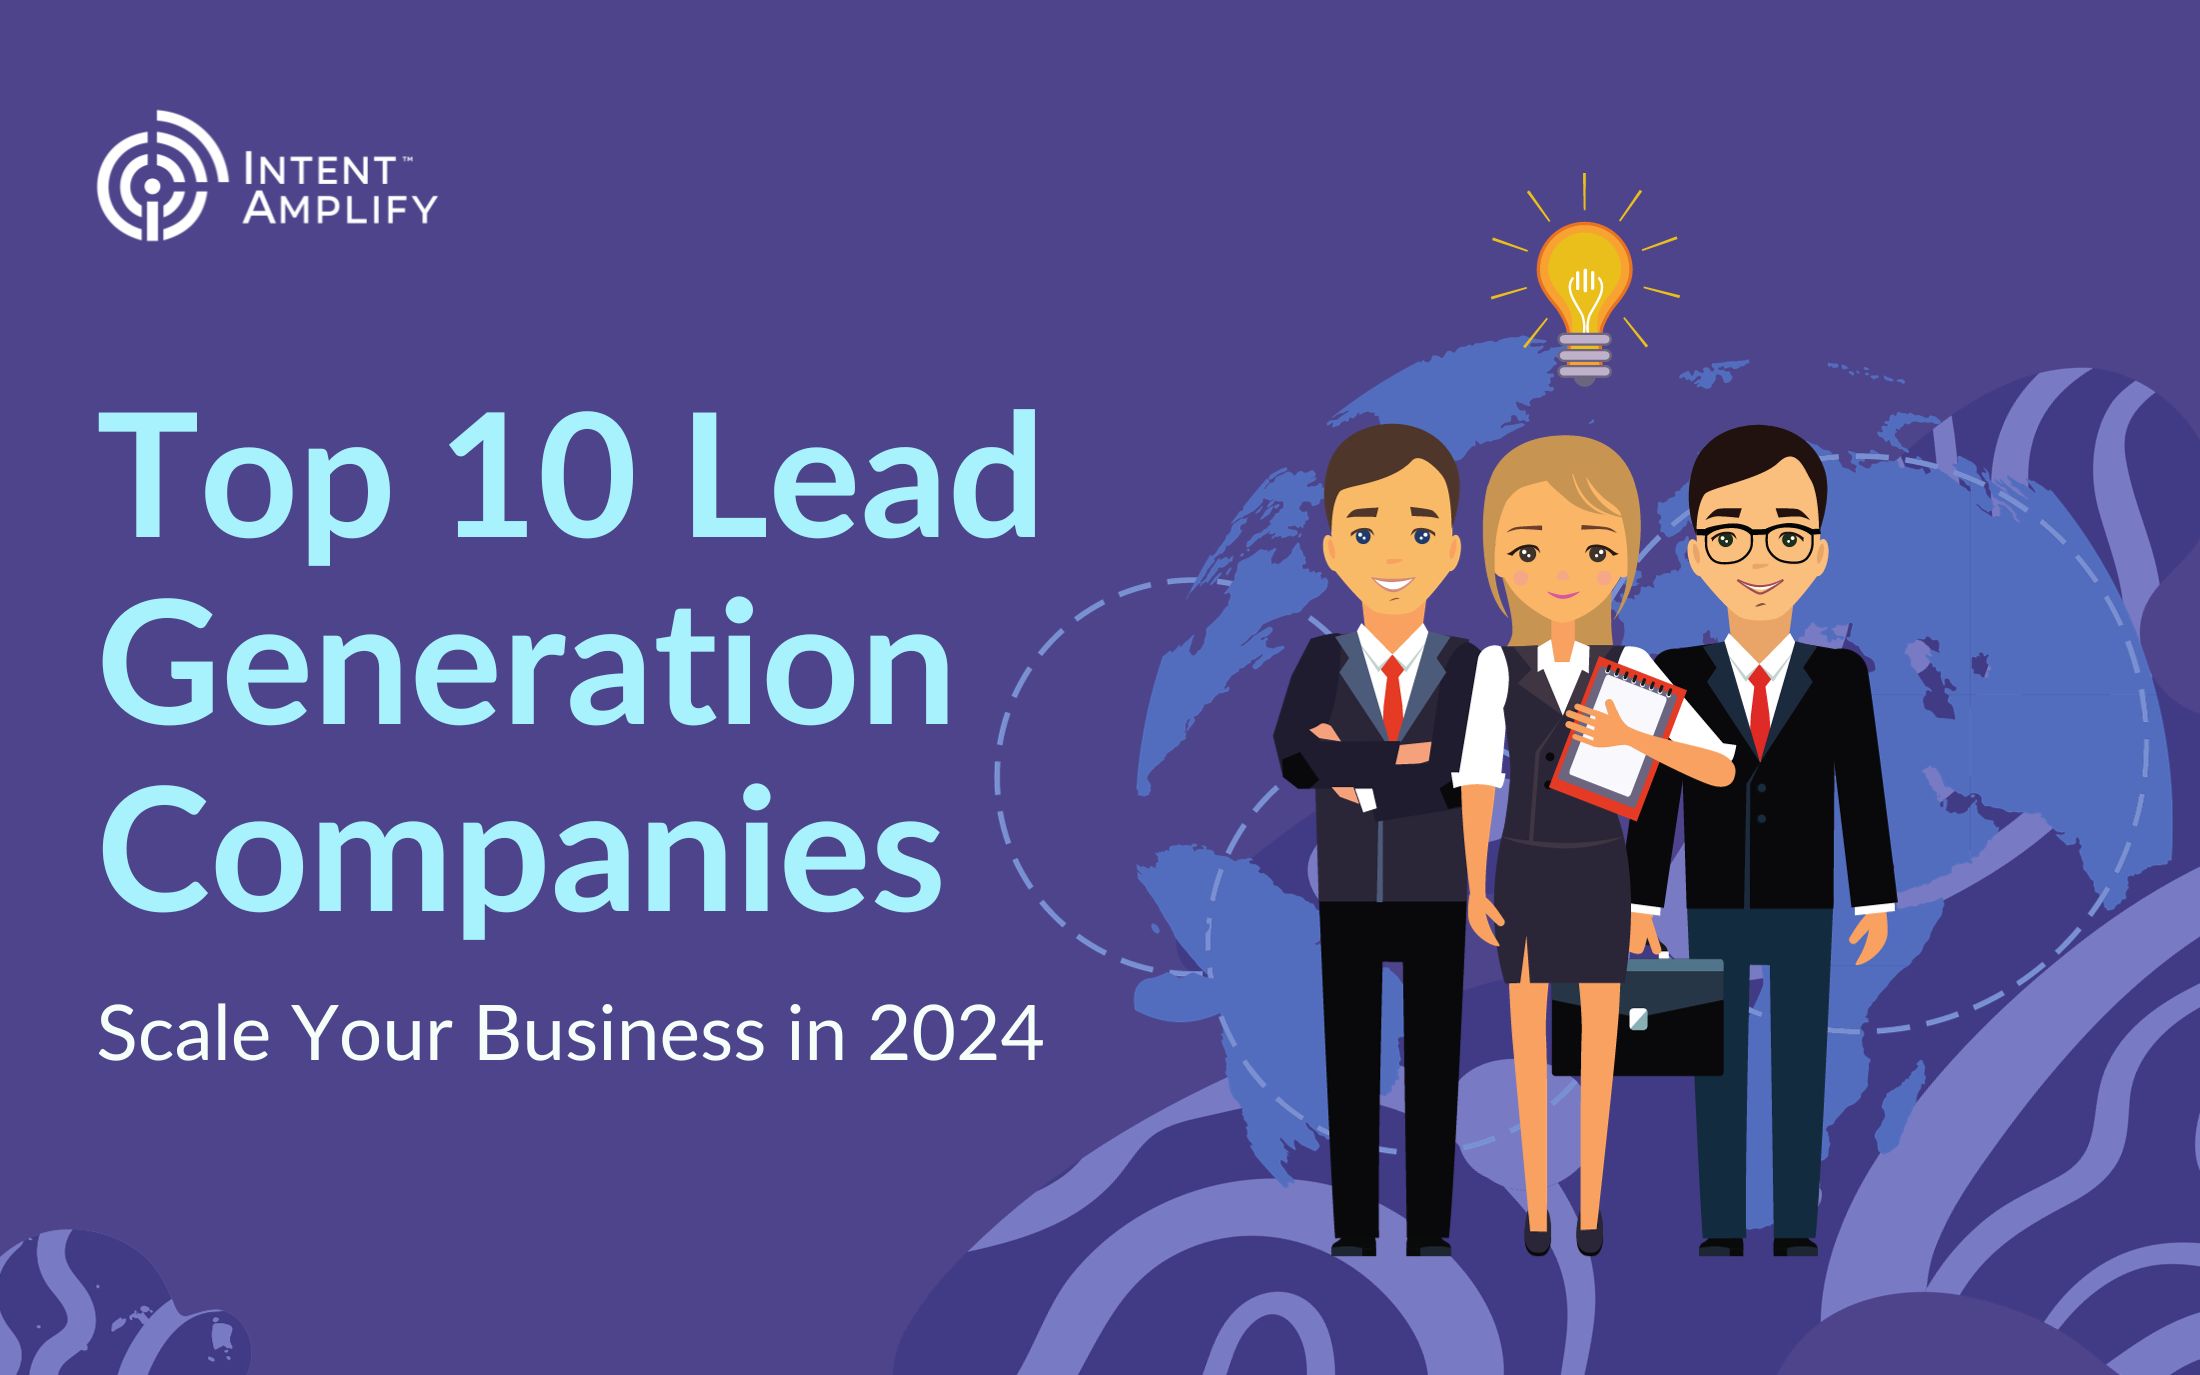 Top 10 B2B Lead Generation Companies to Scale Your Business in 2024